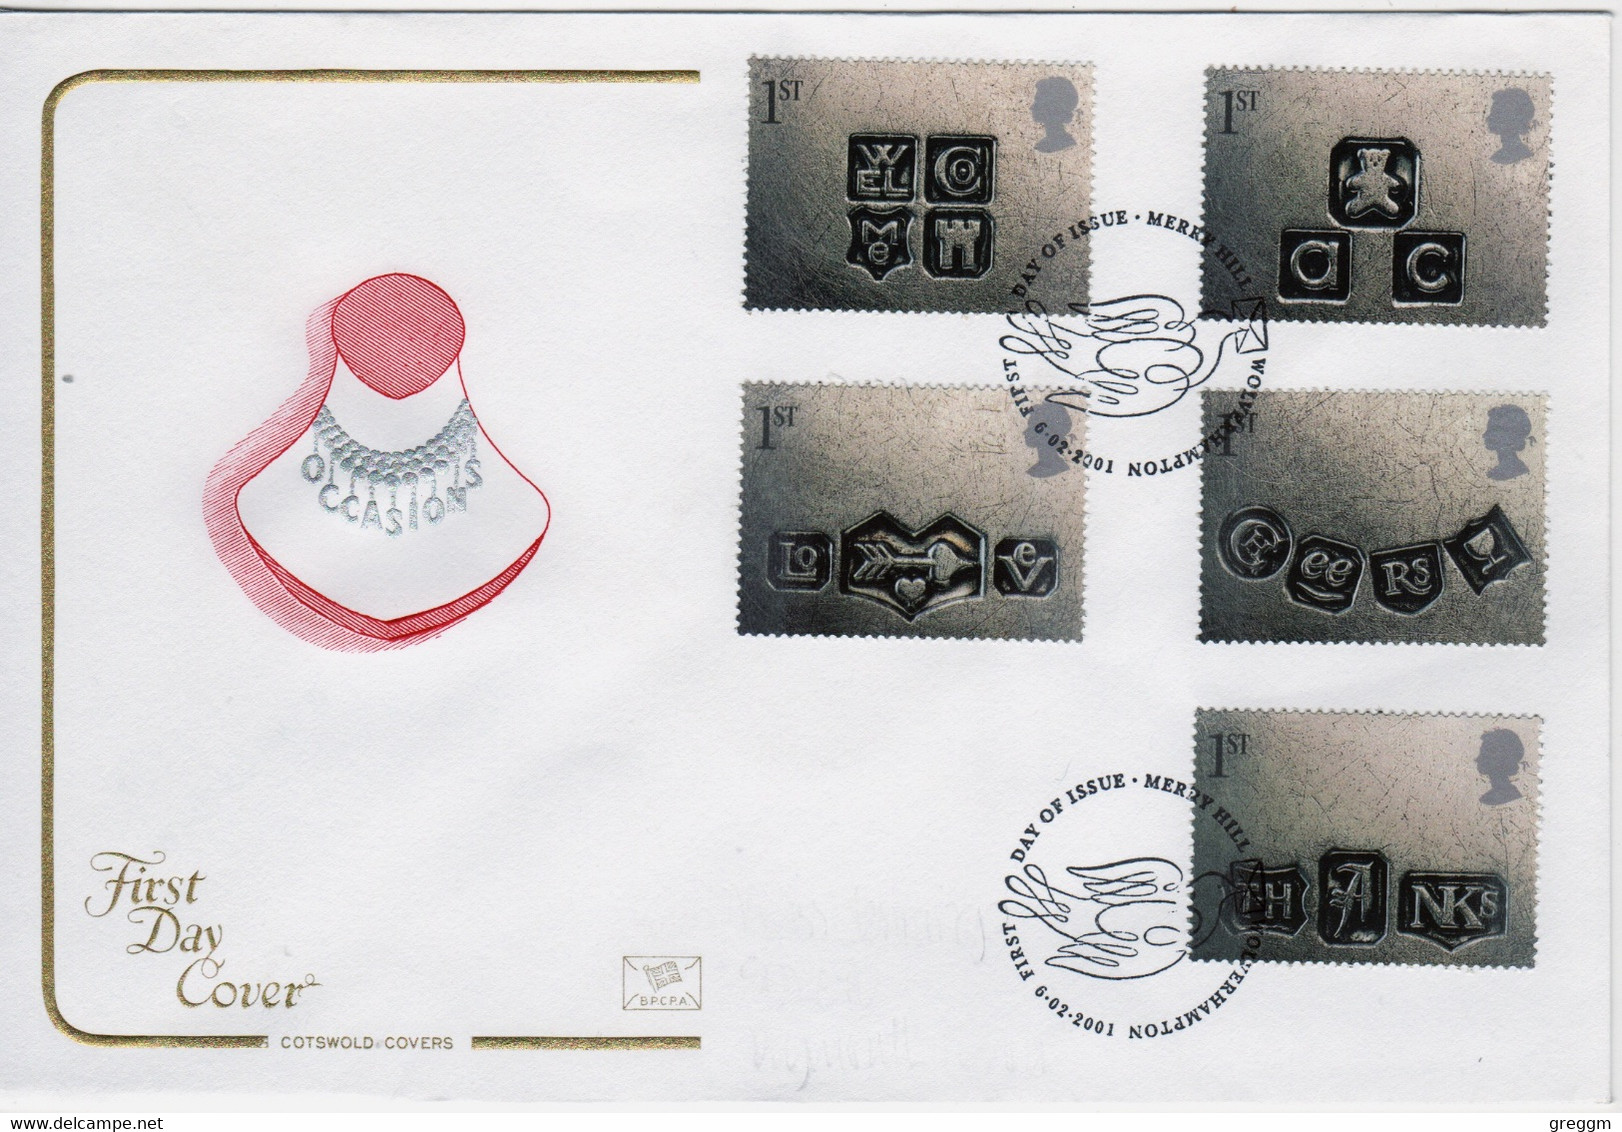 GB First Day Cover To Celebrate Occasions  2001 - 2001-2010. Decimale Uitgaven